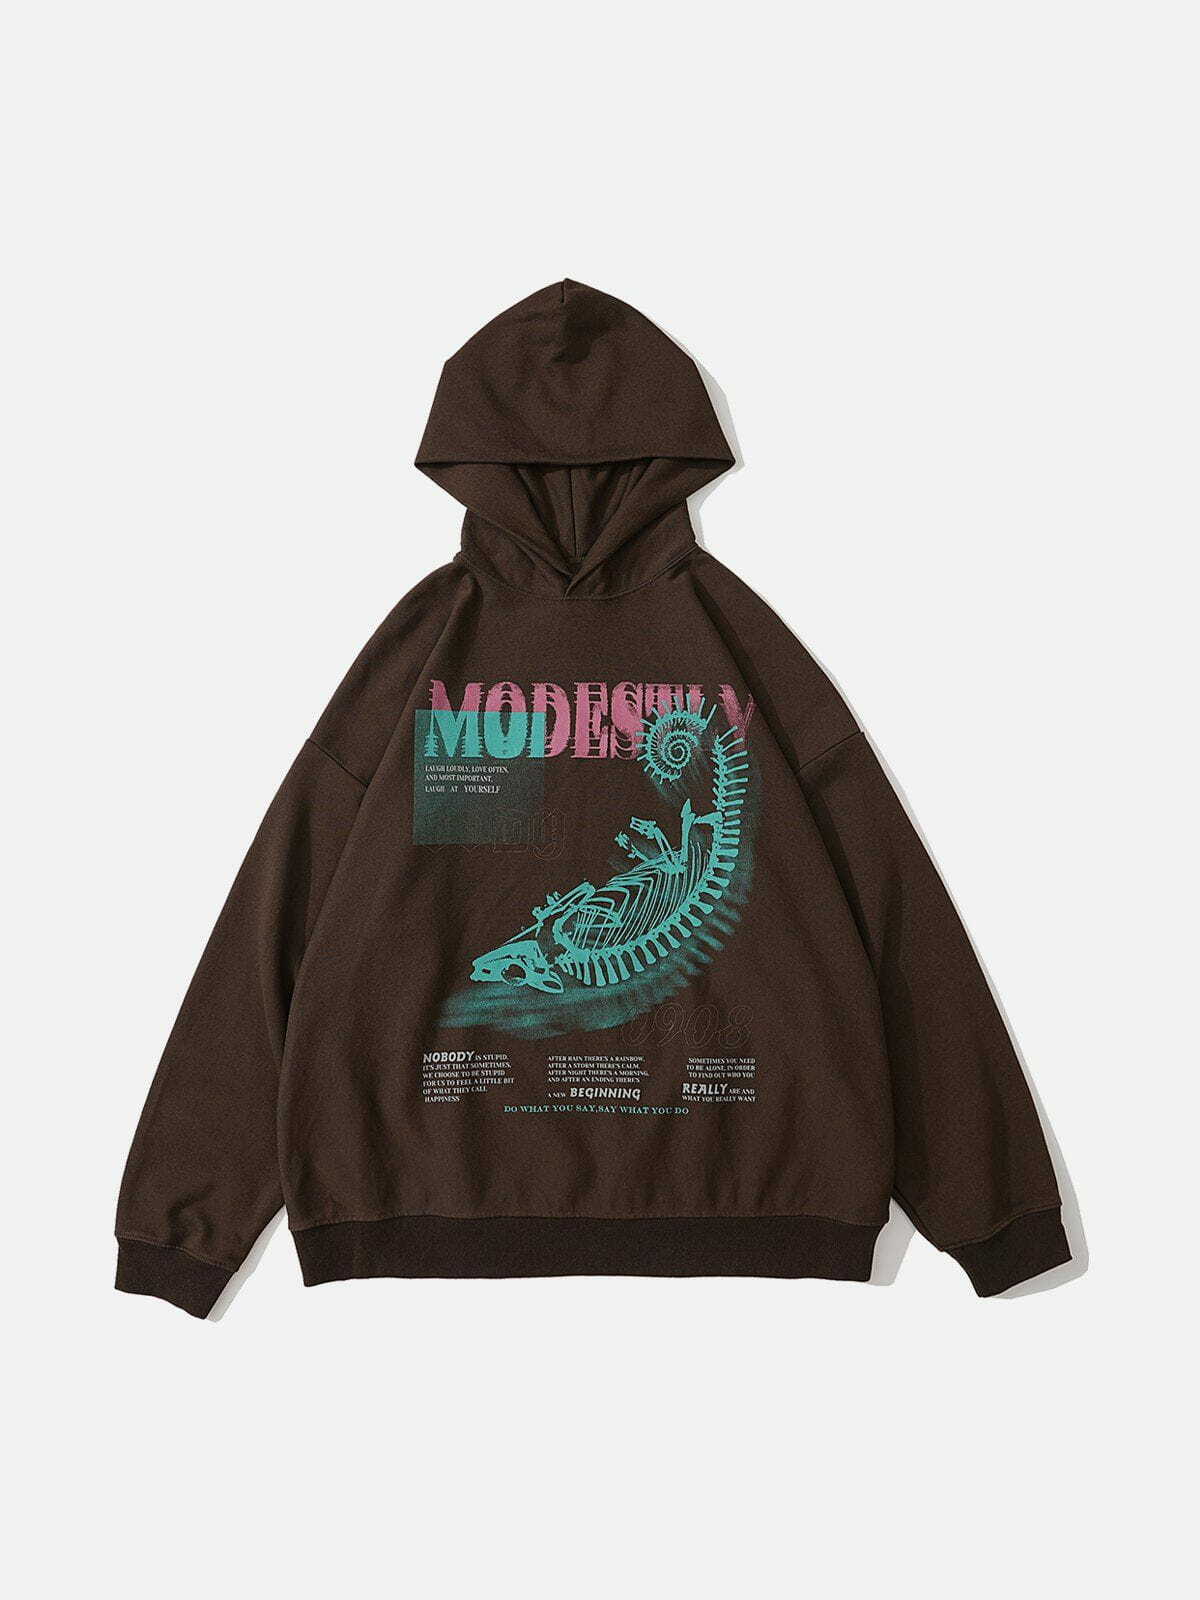 washed chronofossil print hoodie edgy streetwear 8434